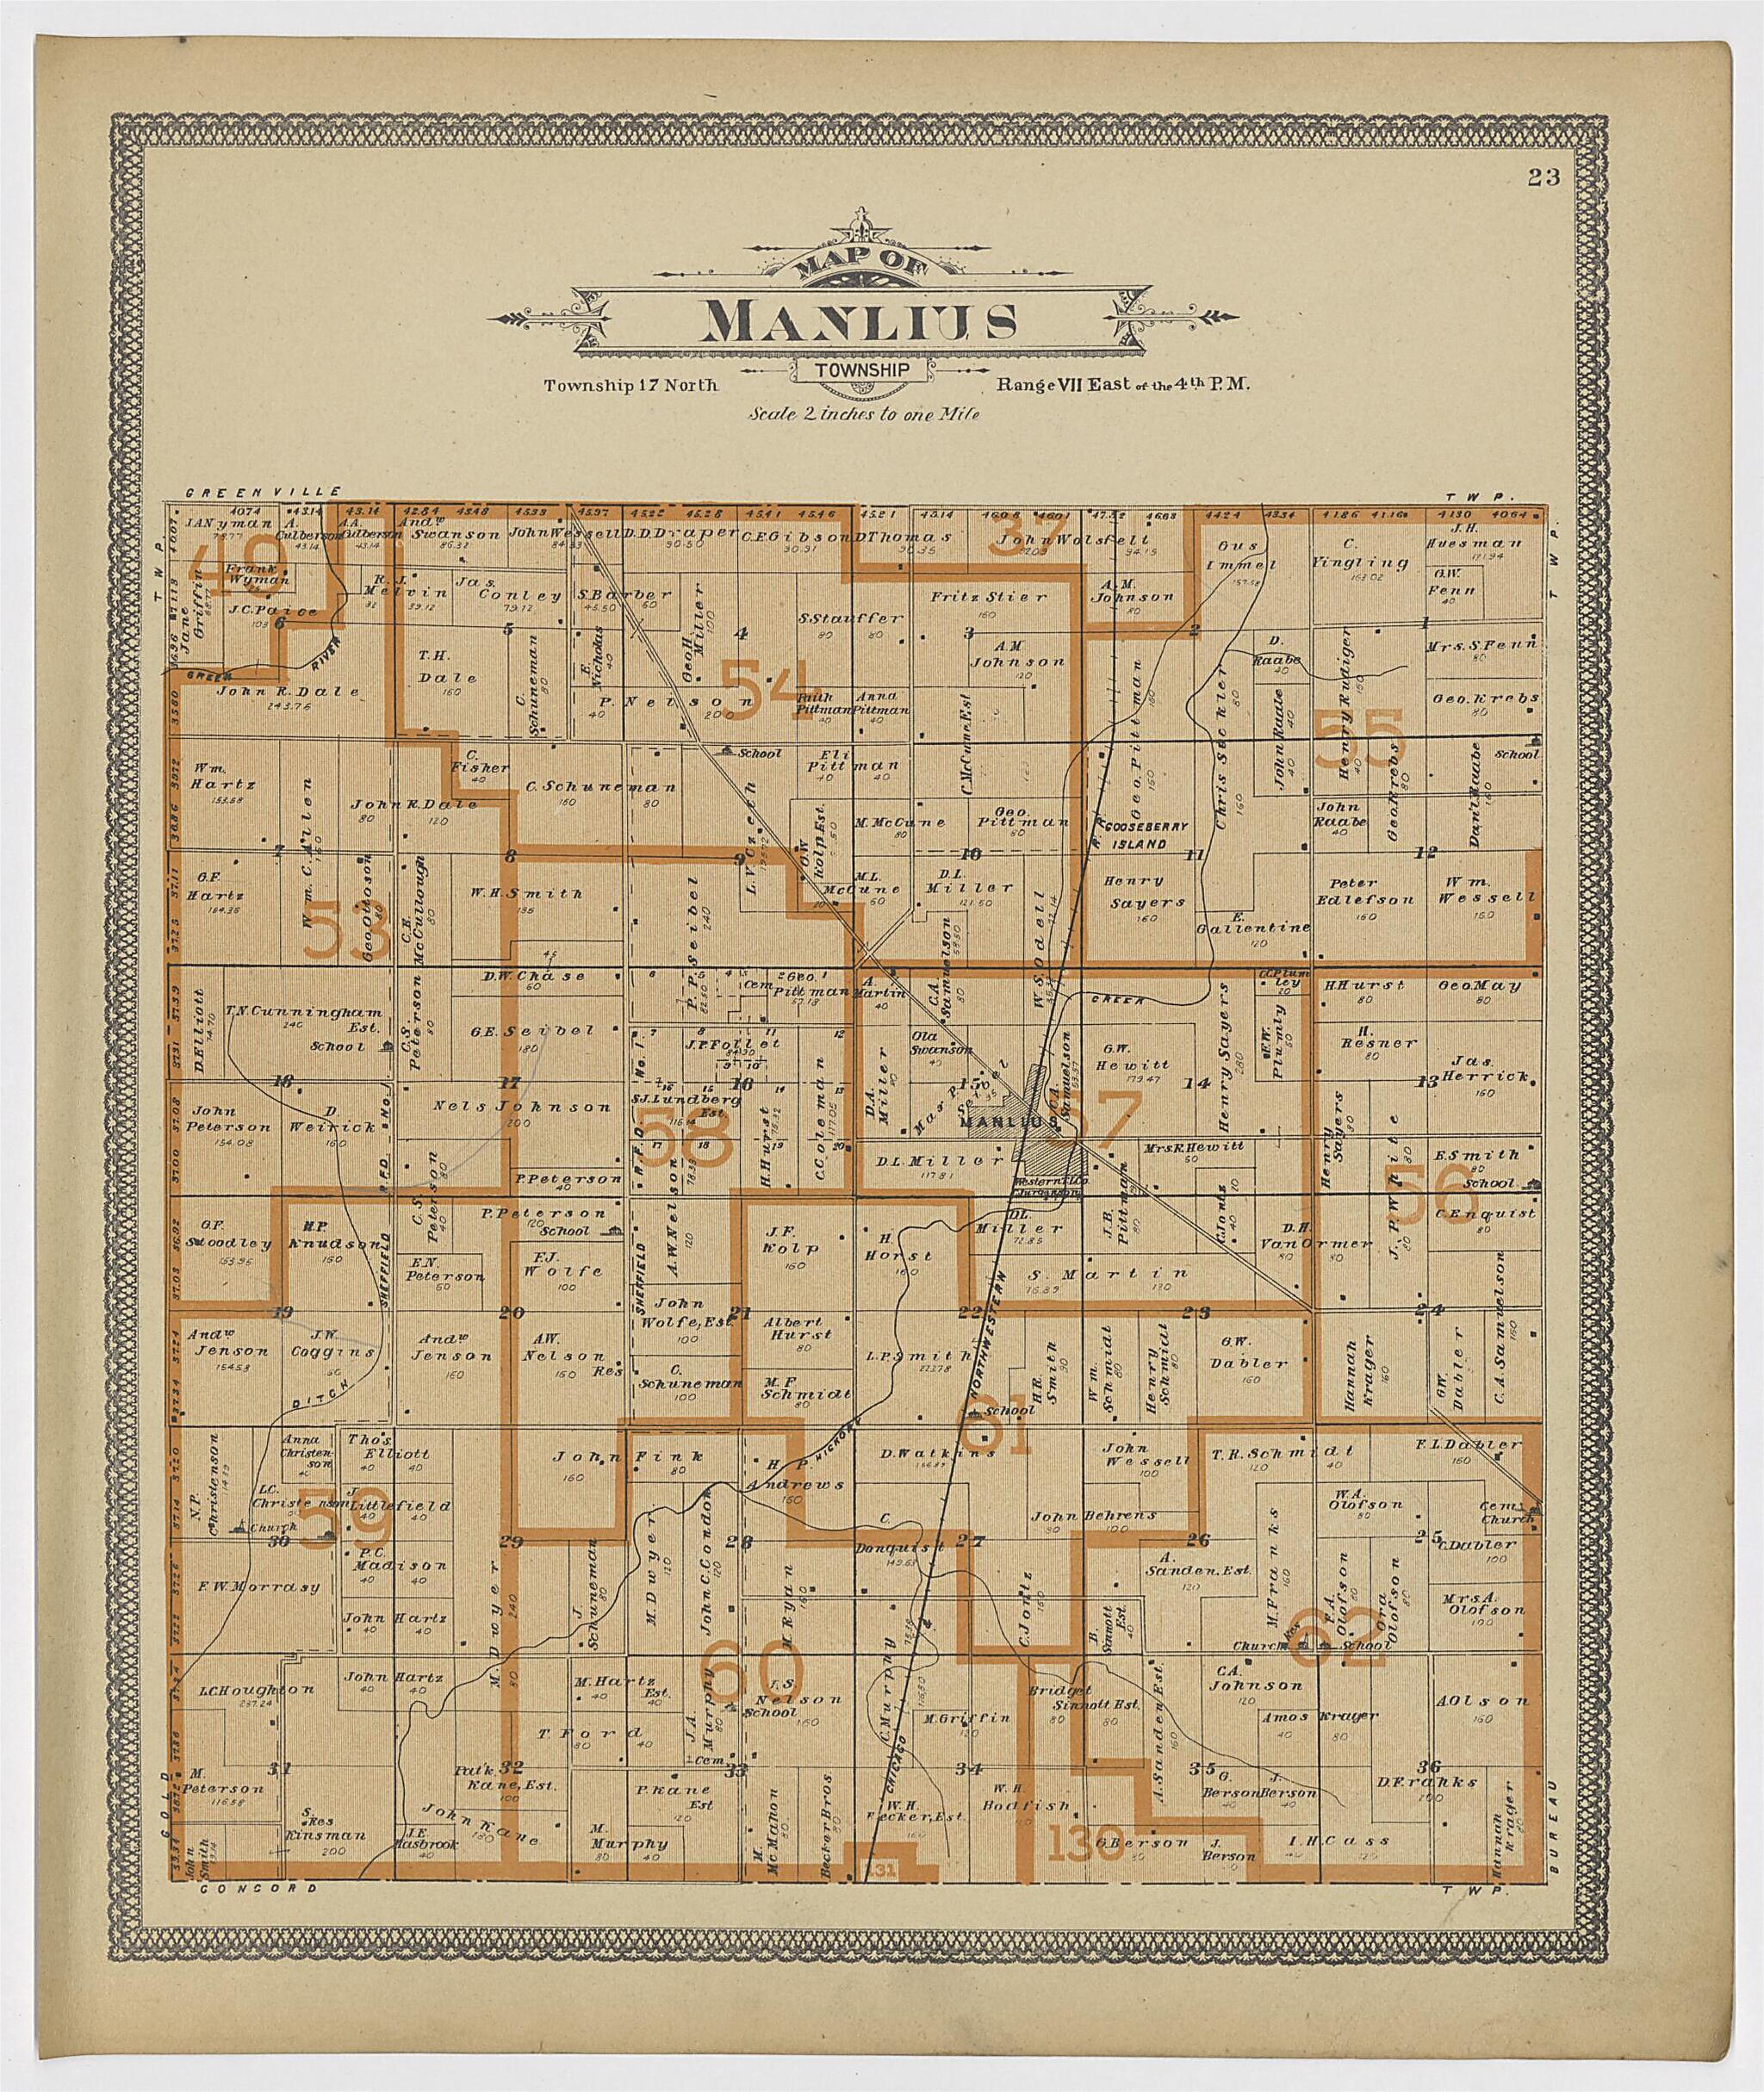 This old map of Image 13 of 20th Century Atlas of Bureau County, Illinois from Atlas of Bureau County, Illinois from 1905 was created by  Middle-West Publishing Co in 1905